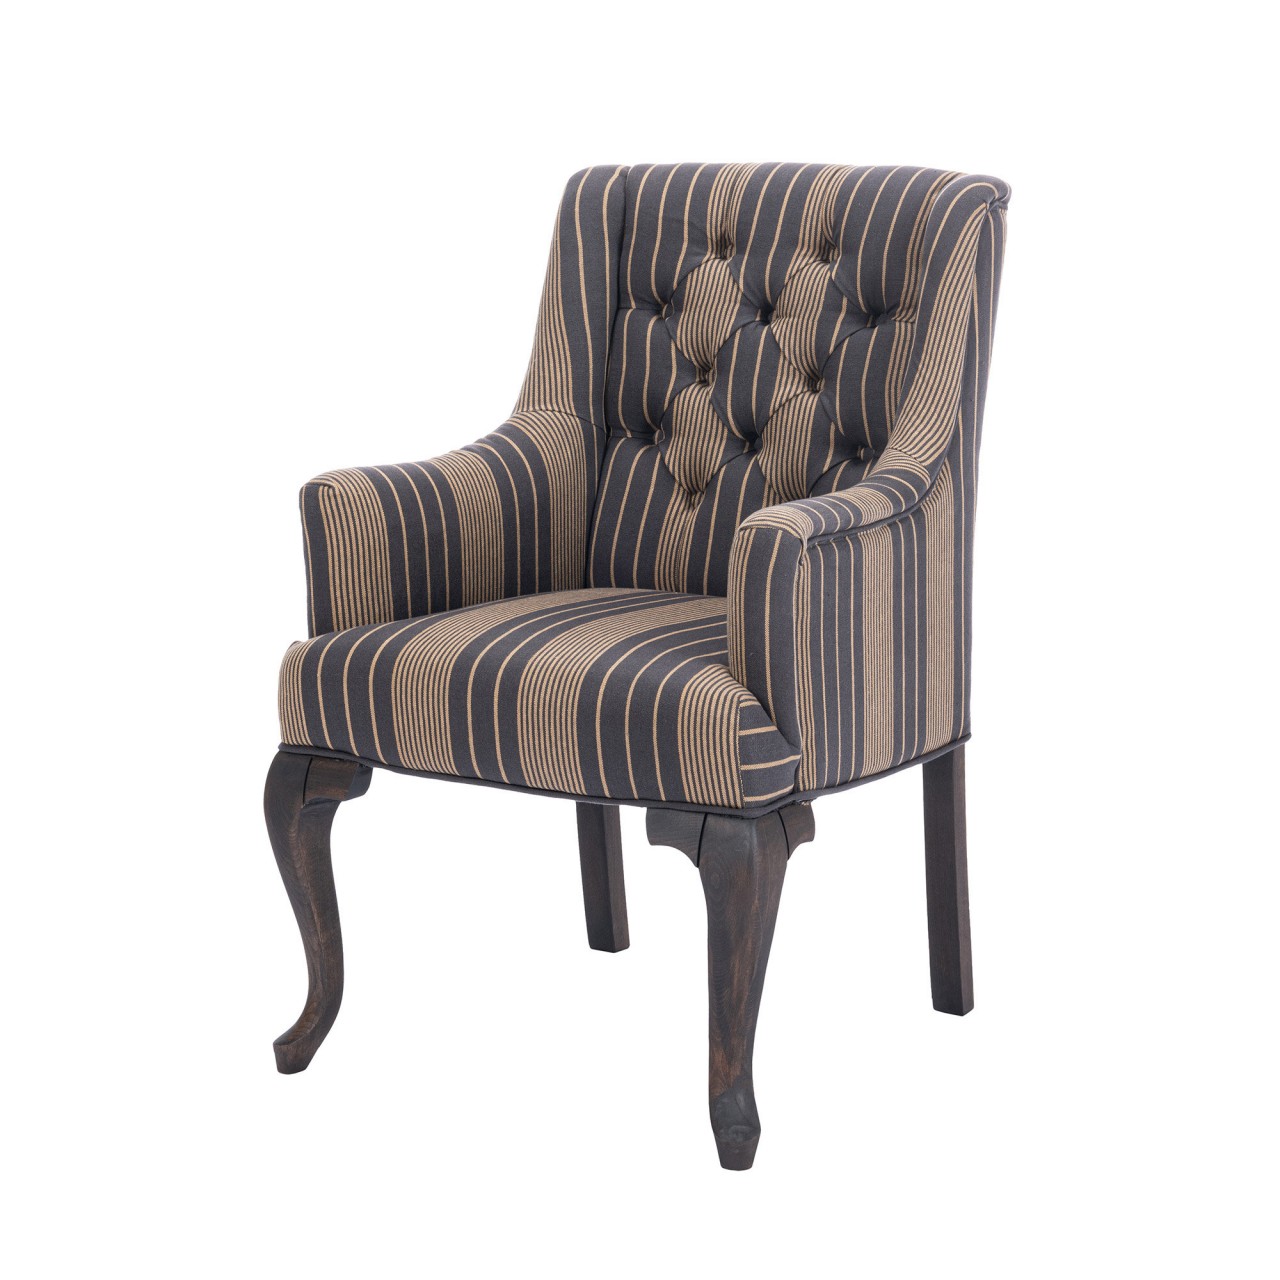 FITZROY TUFTED CHAIR - NEWPORT STRIPES Heavy Linen Fabric